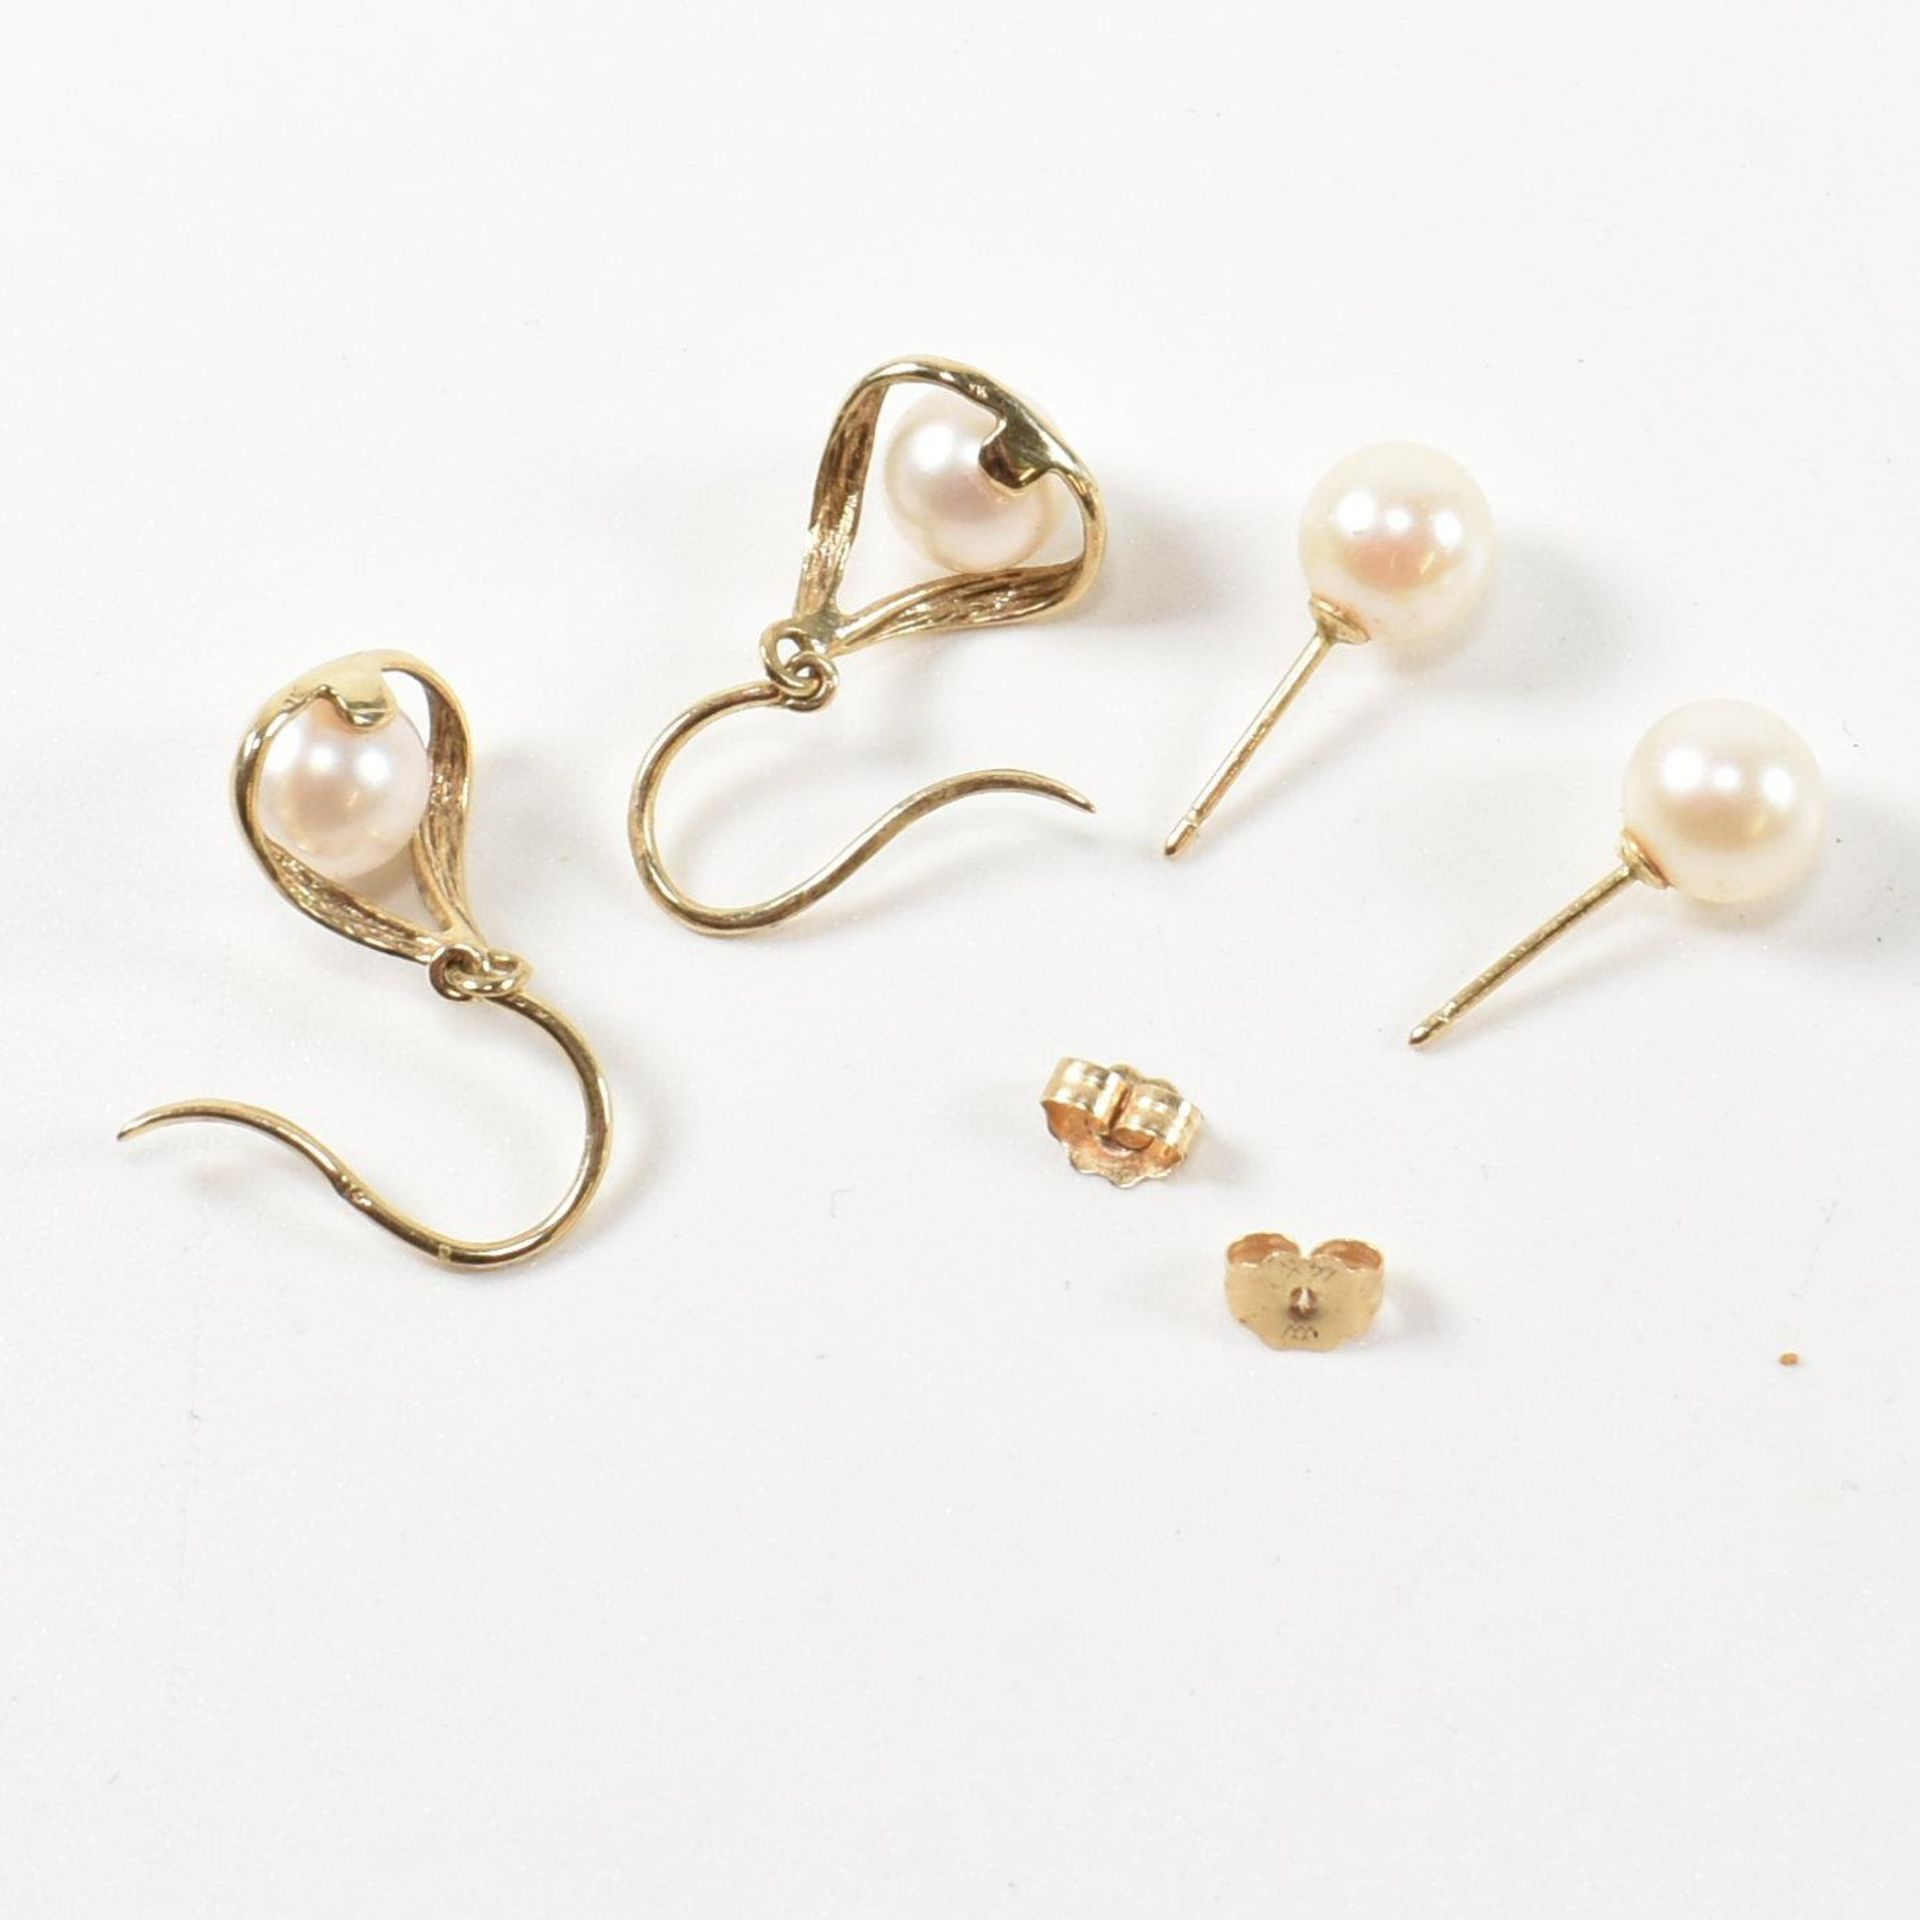 TWO PAIRS OF GOLD & CULTURED PEARL EARRINGS - Image 4 of 6